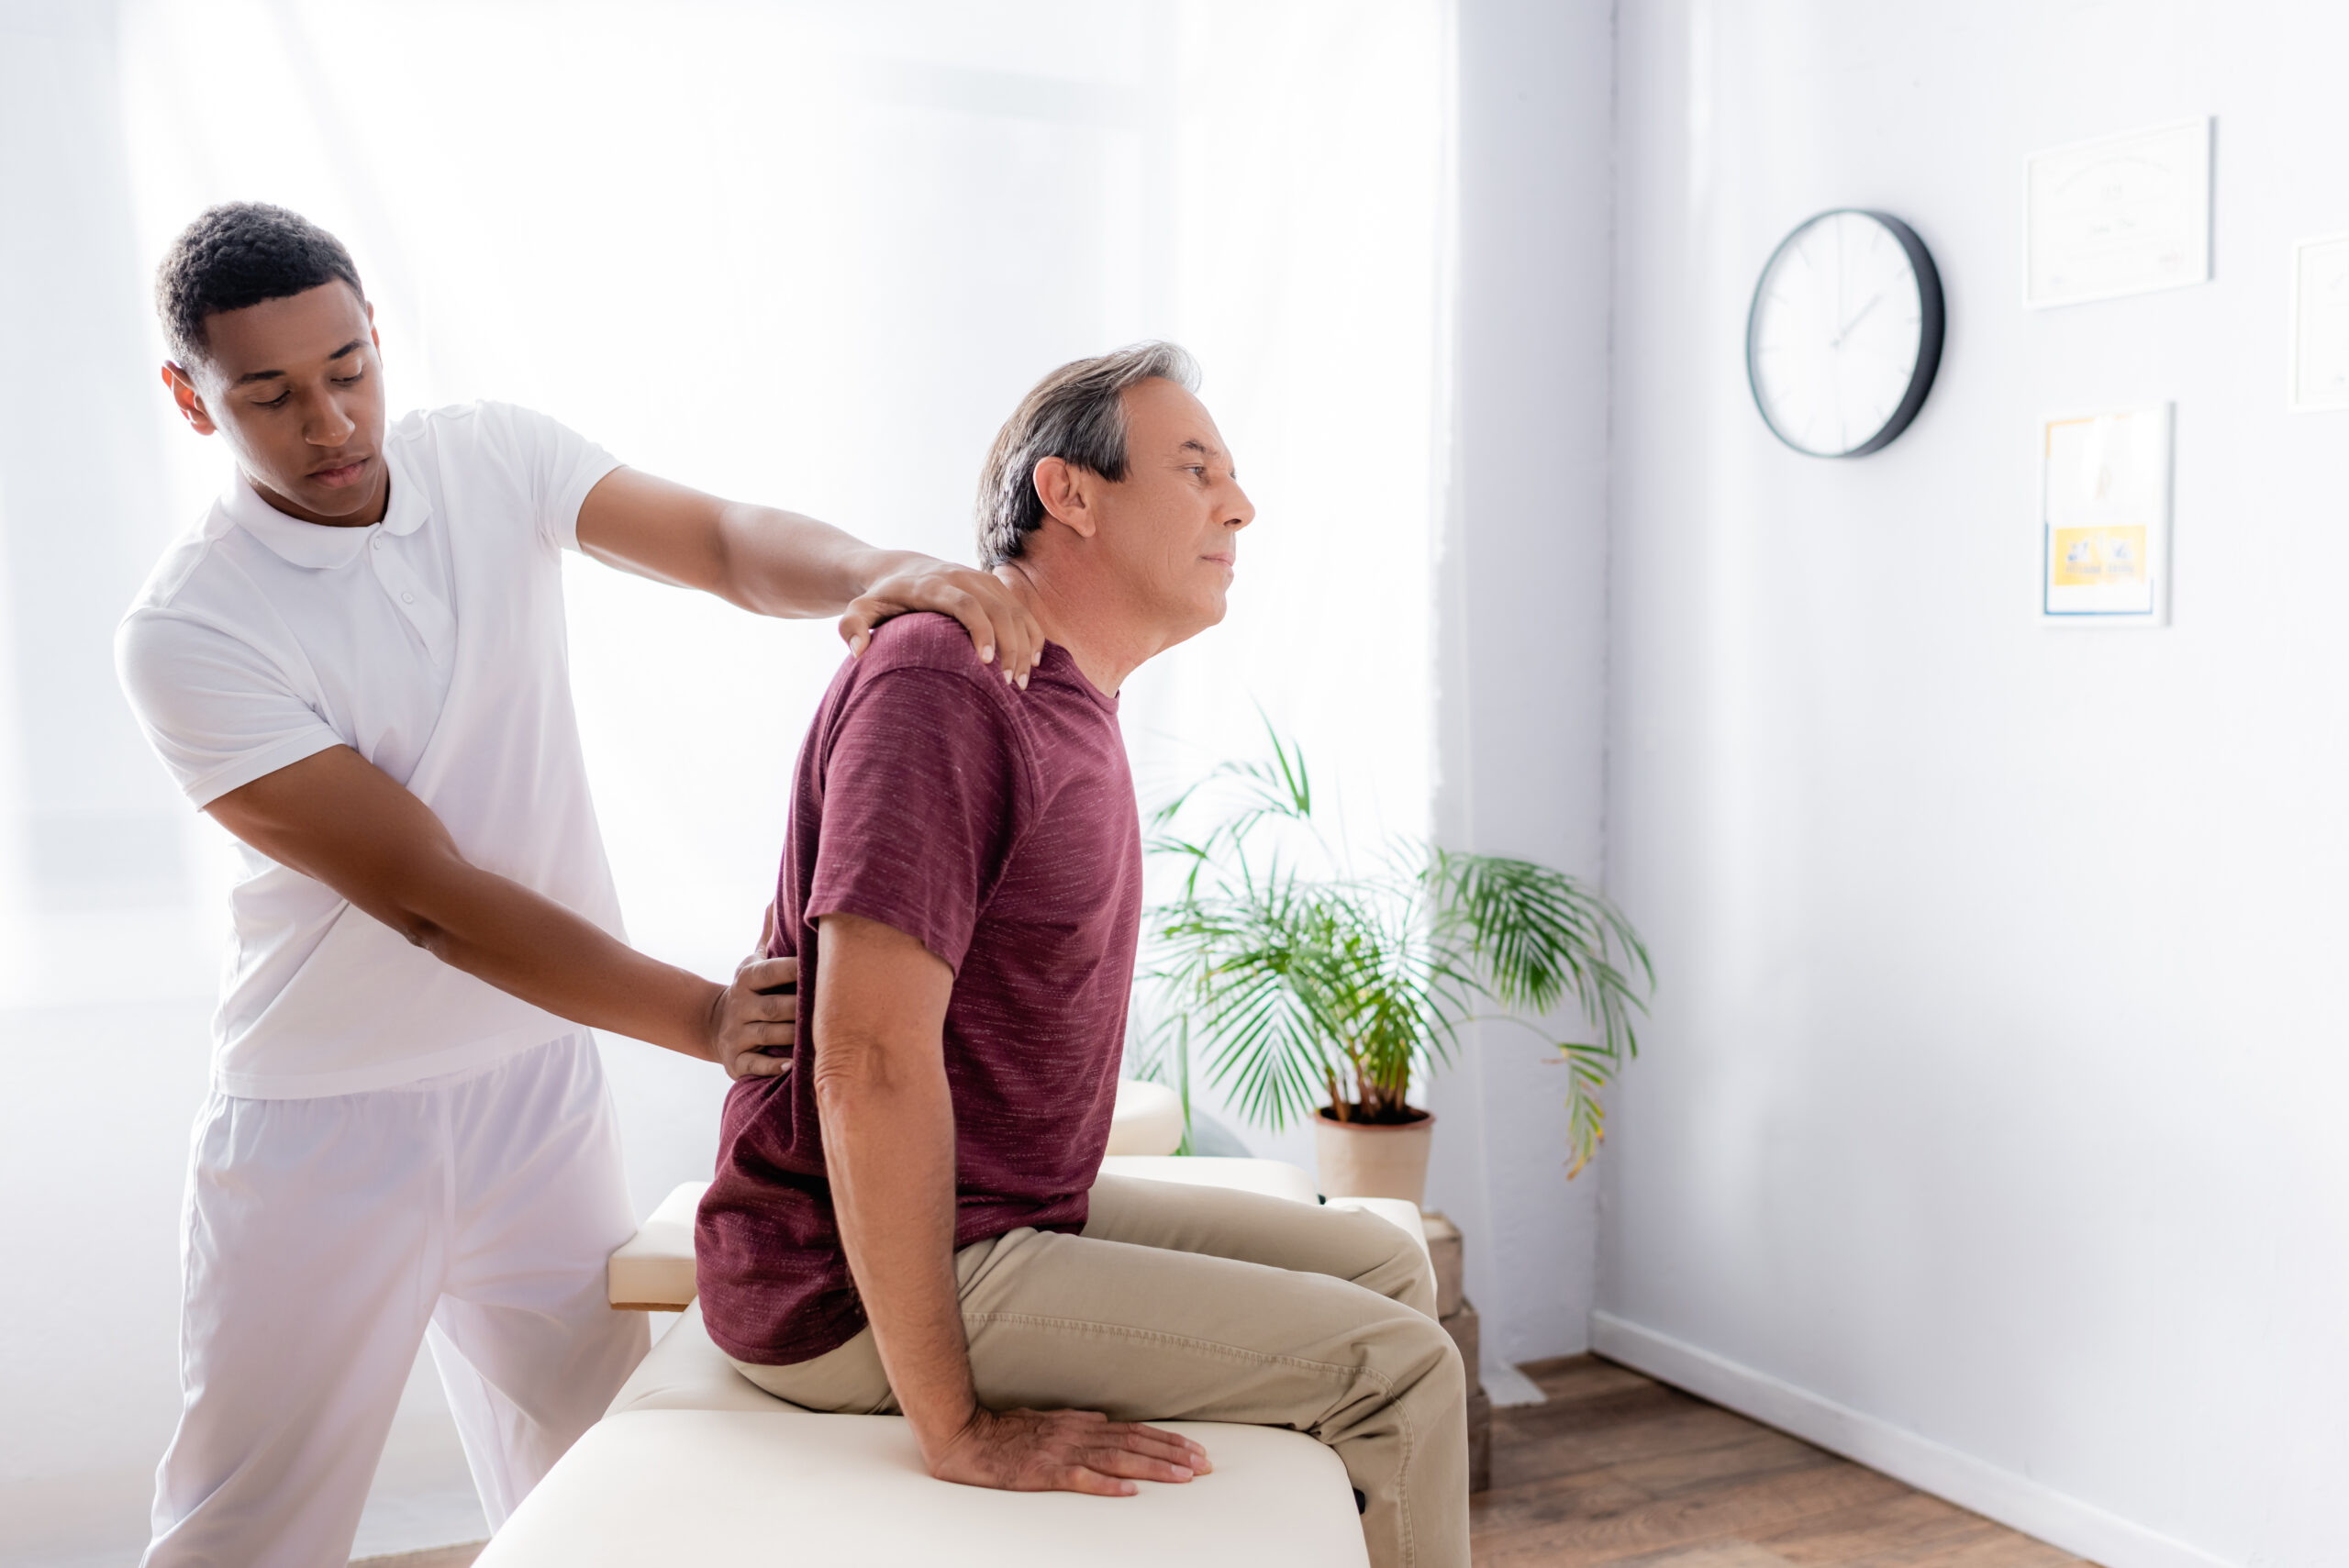 5 Reasons To See A Chiropractor In 2022